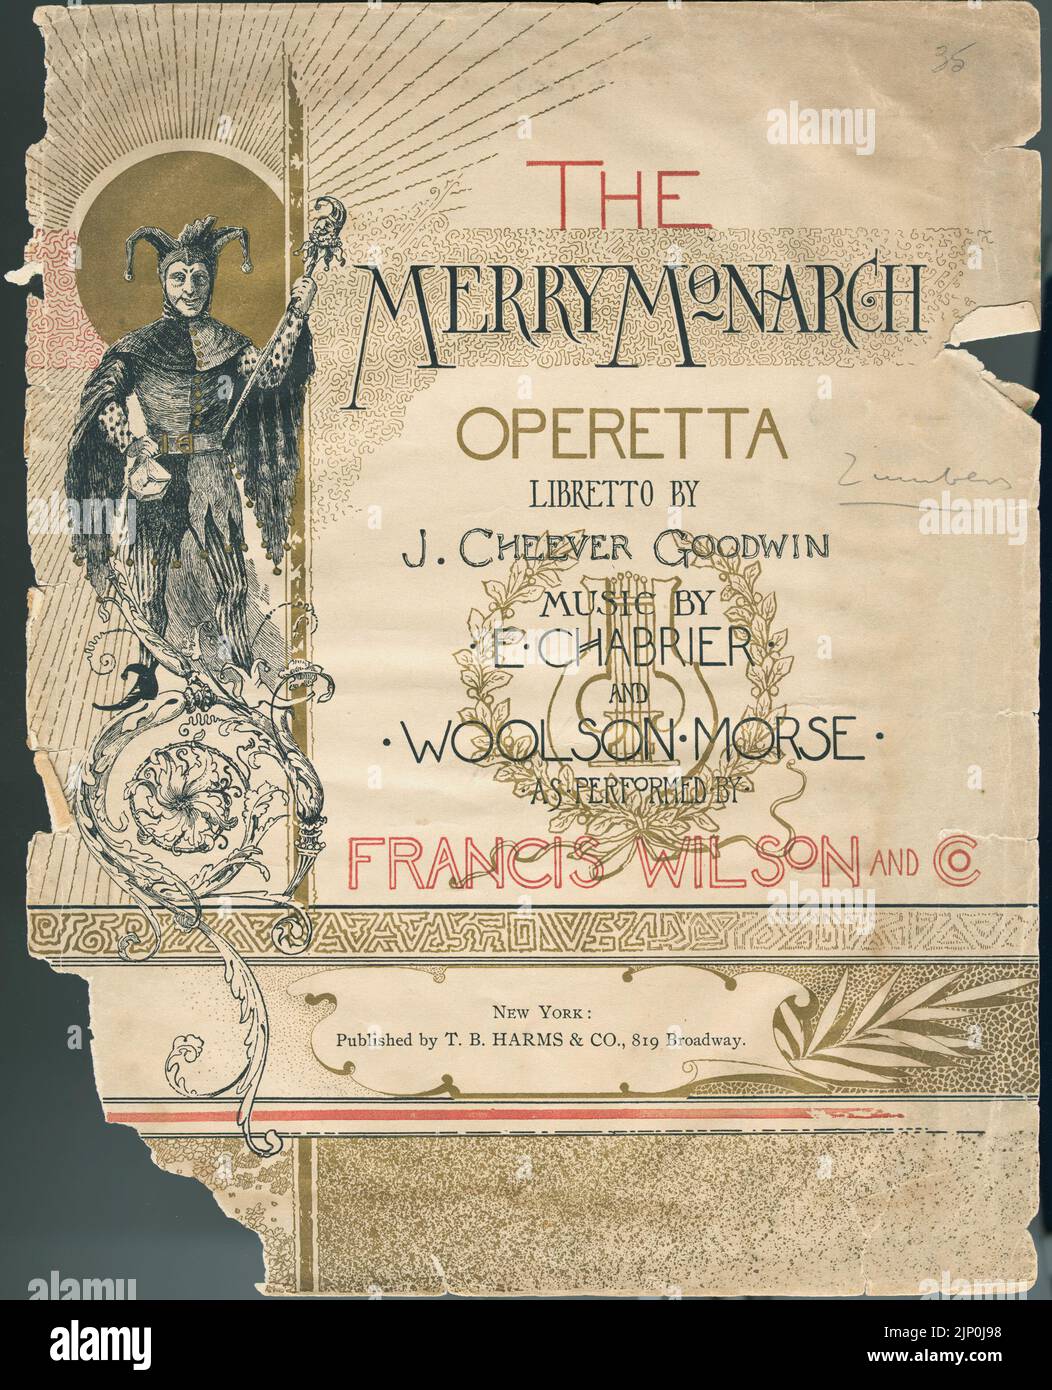 The Merry Monarch Operetta, Libretto by John Cheever Goodwin, Music by Emmanuel Chabrier and Woolson Morse, As Performed by Francis Wilson and Company, Published by T. B. Harms and Company (1890) Sheet music cover Stock Photo